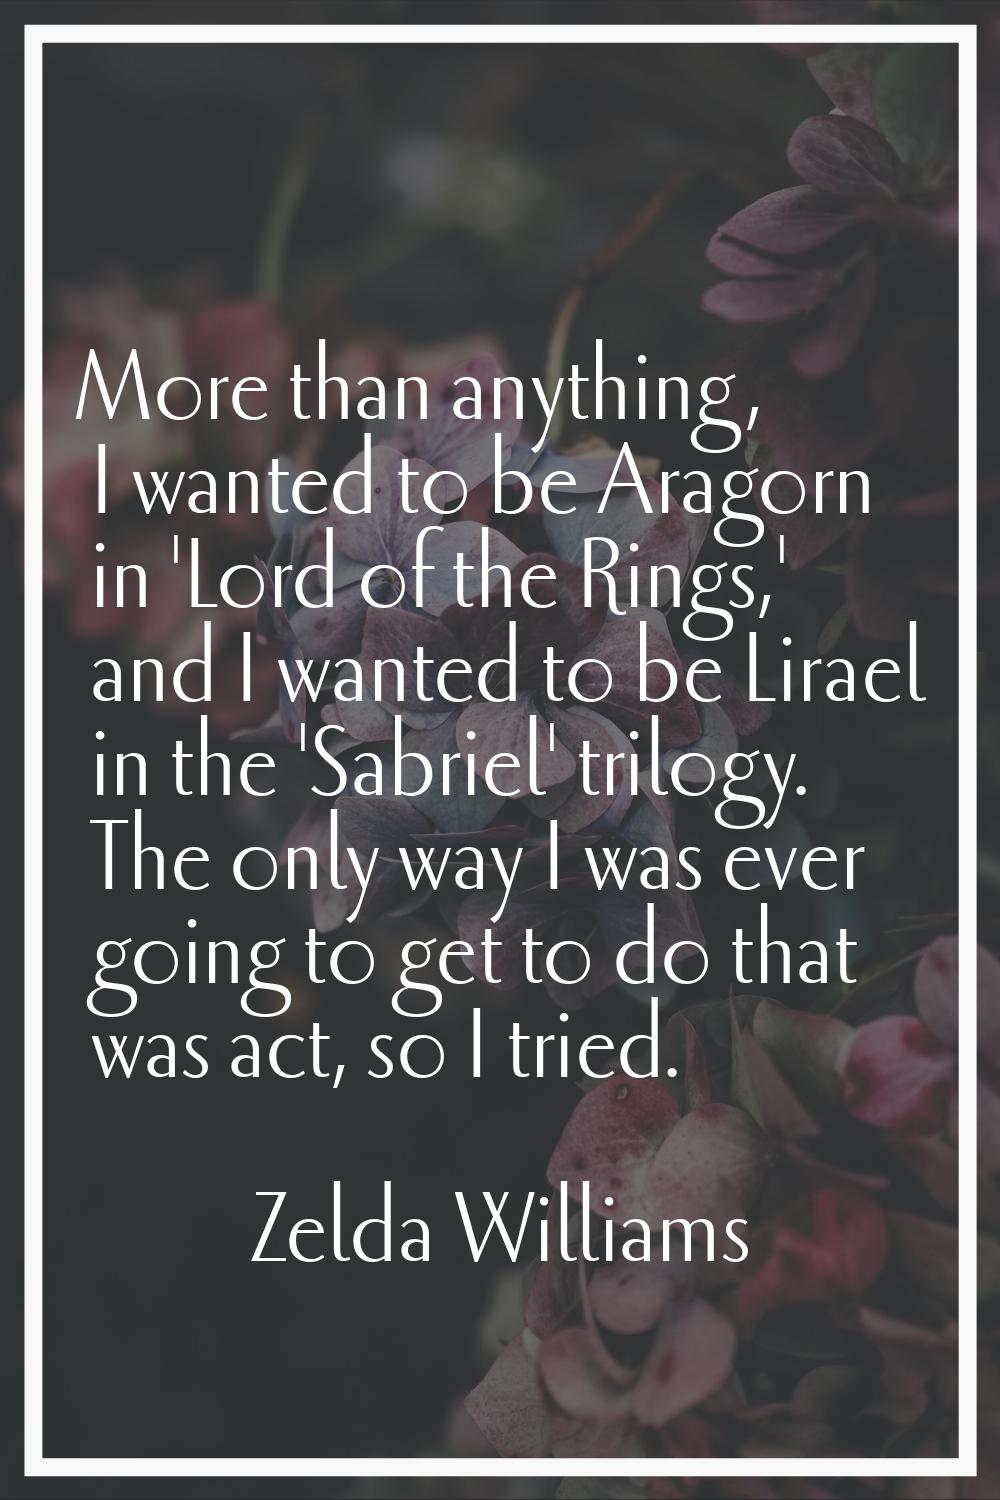 More than anything, I wanted to be Aragorn in 'Lord of the Rings,' and I wanted to be Lirael in the